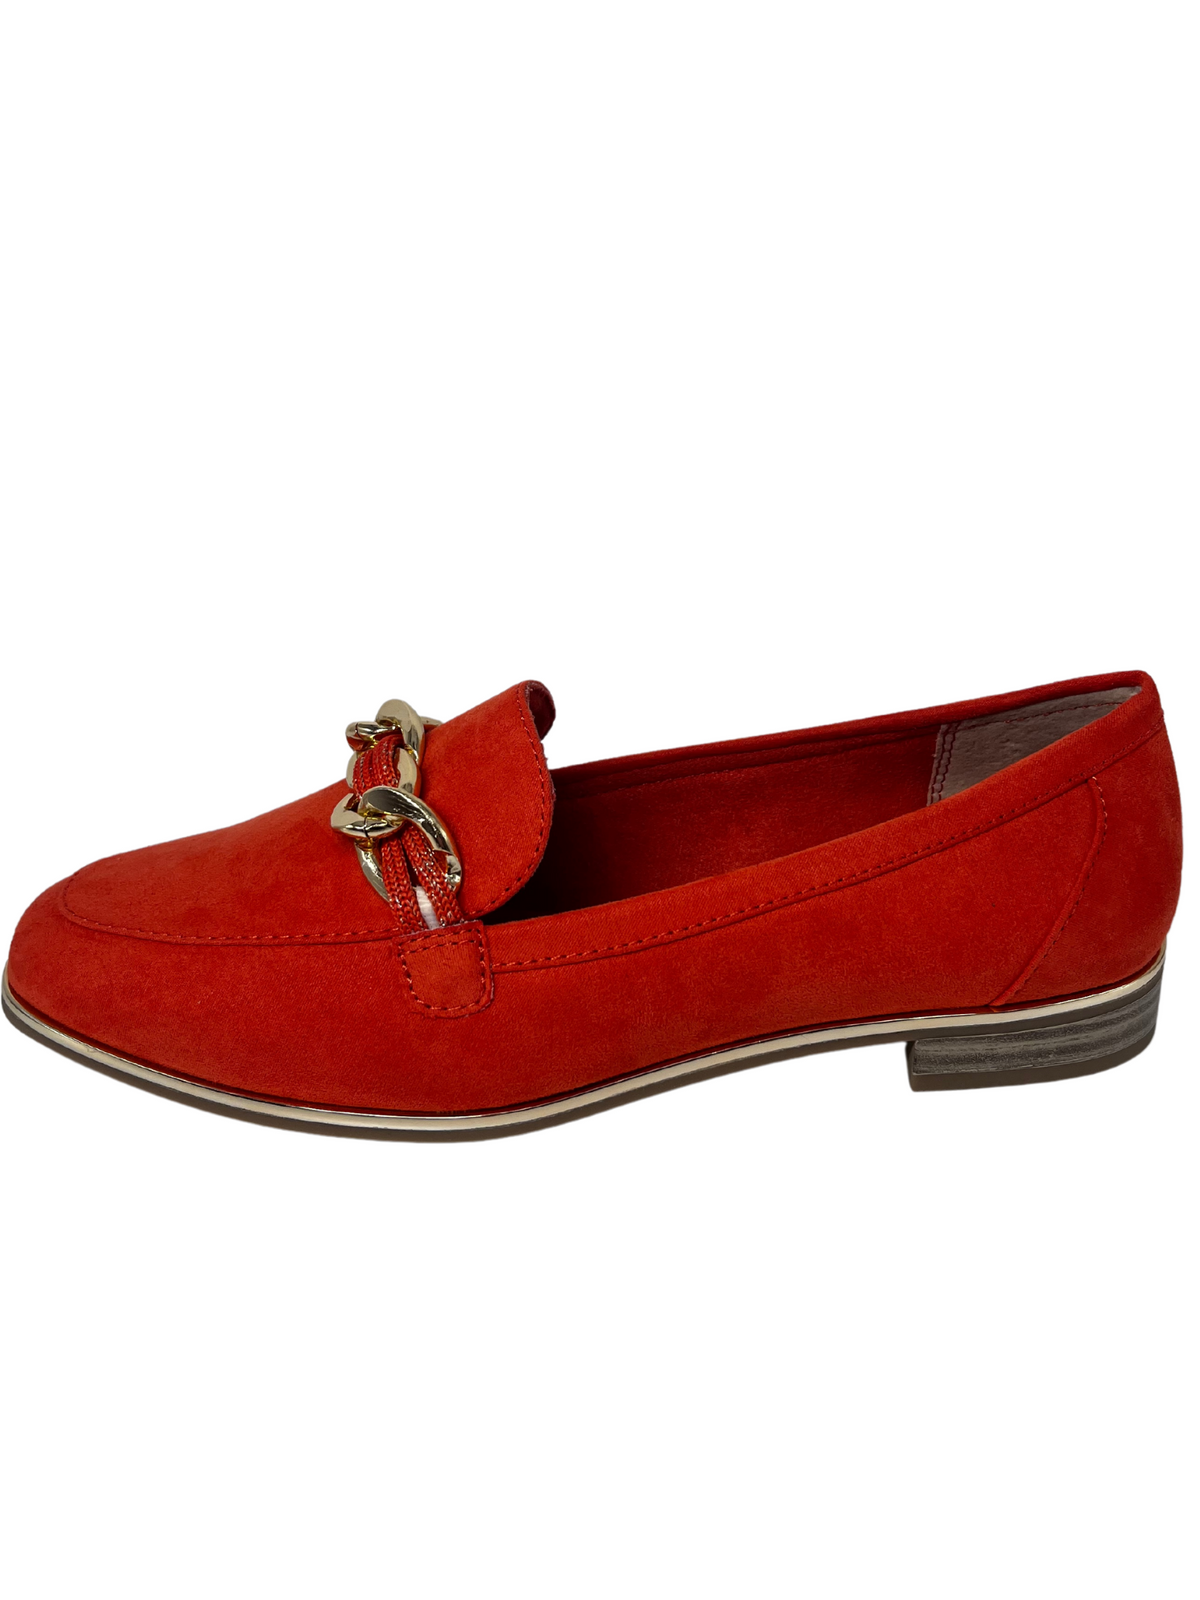 Marco Tozzi Orange Loafers With Chain Detail